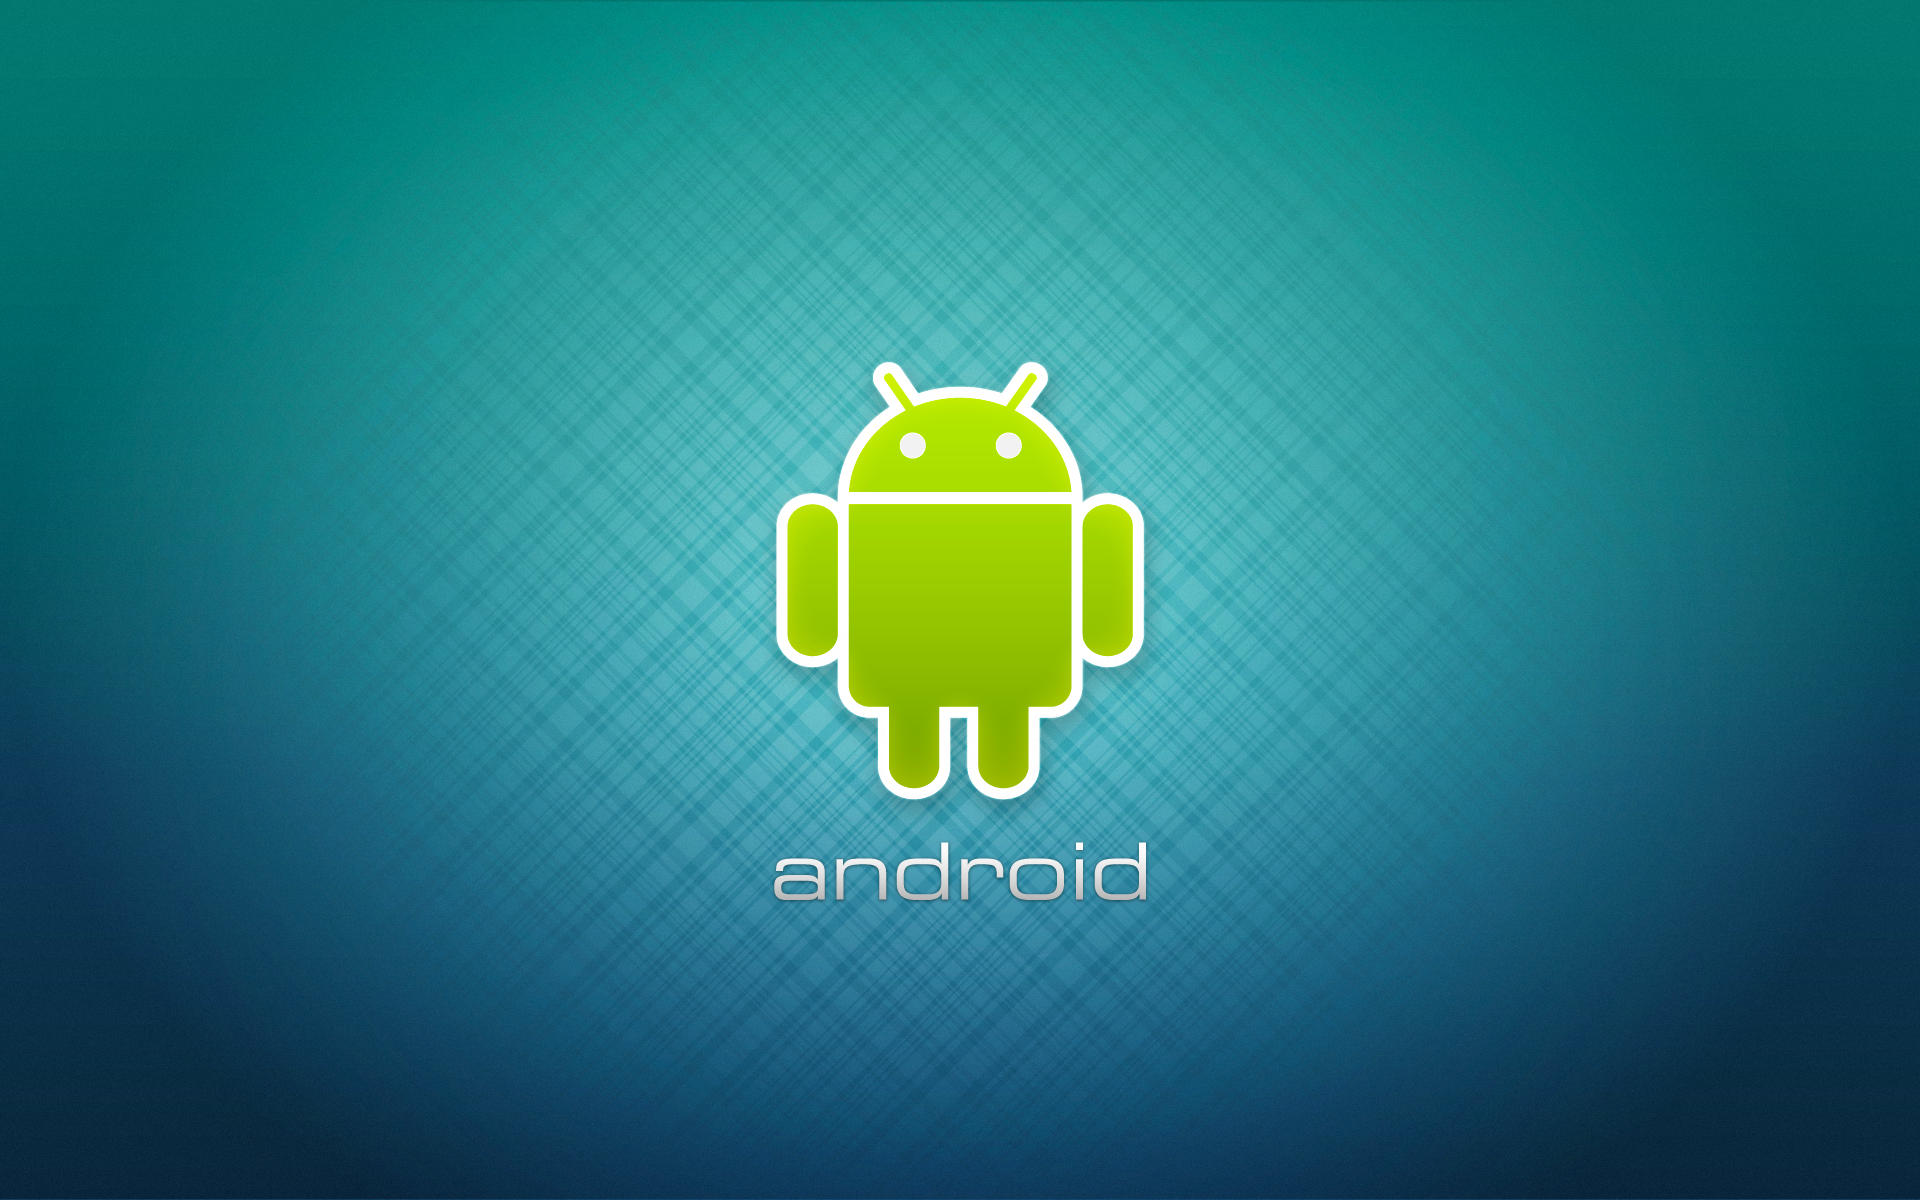 Android Live Wallpaper For Mobile Phones